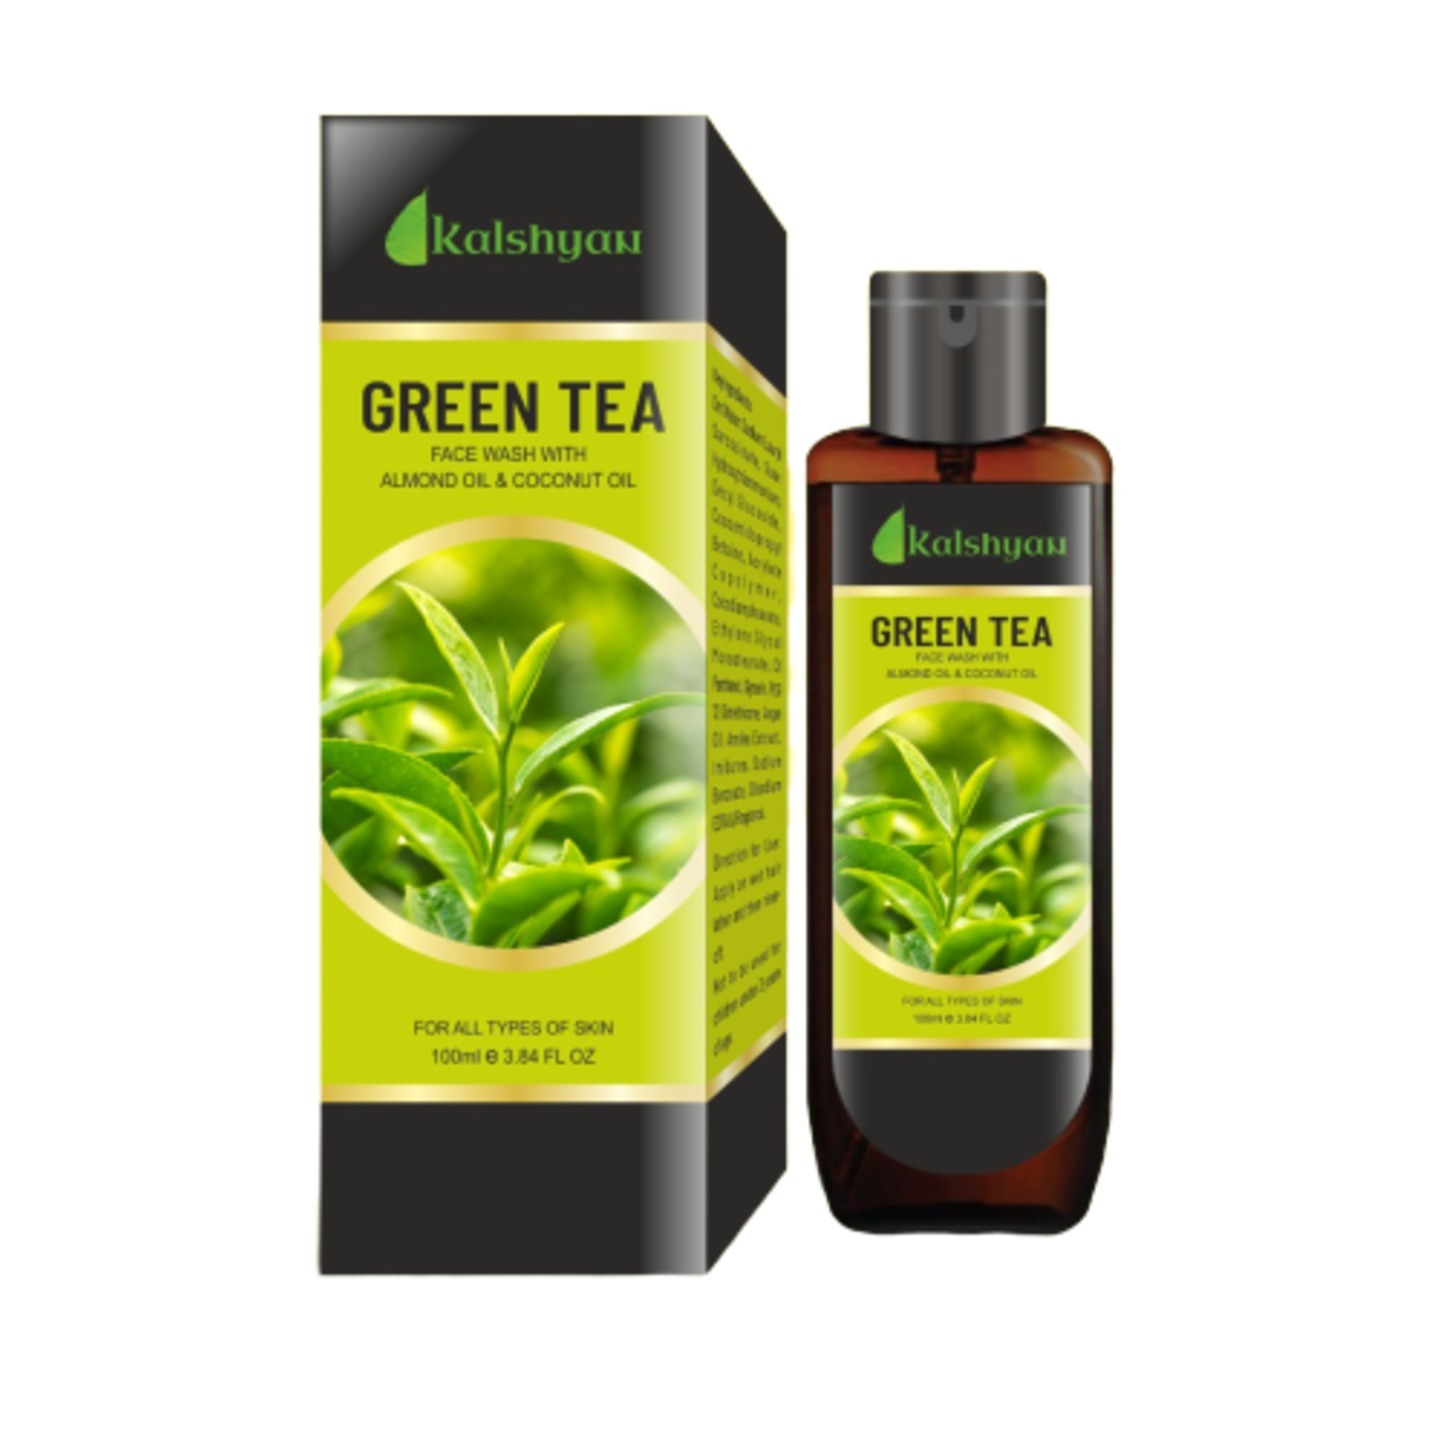 Green Tea Face Wash with Almon Oil